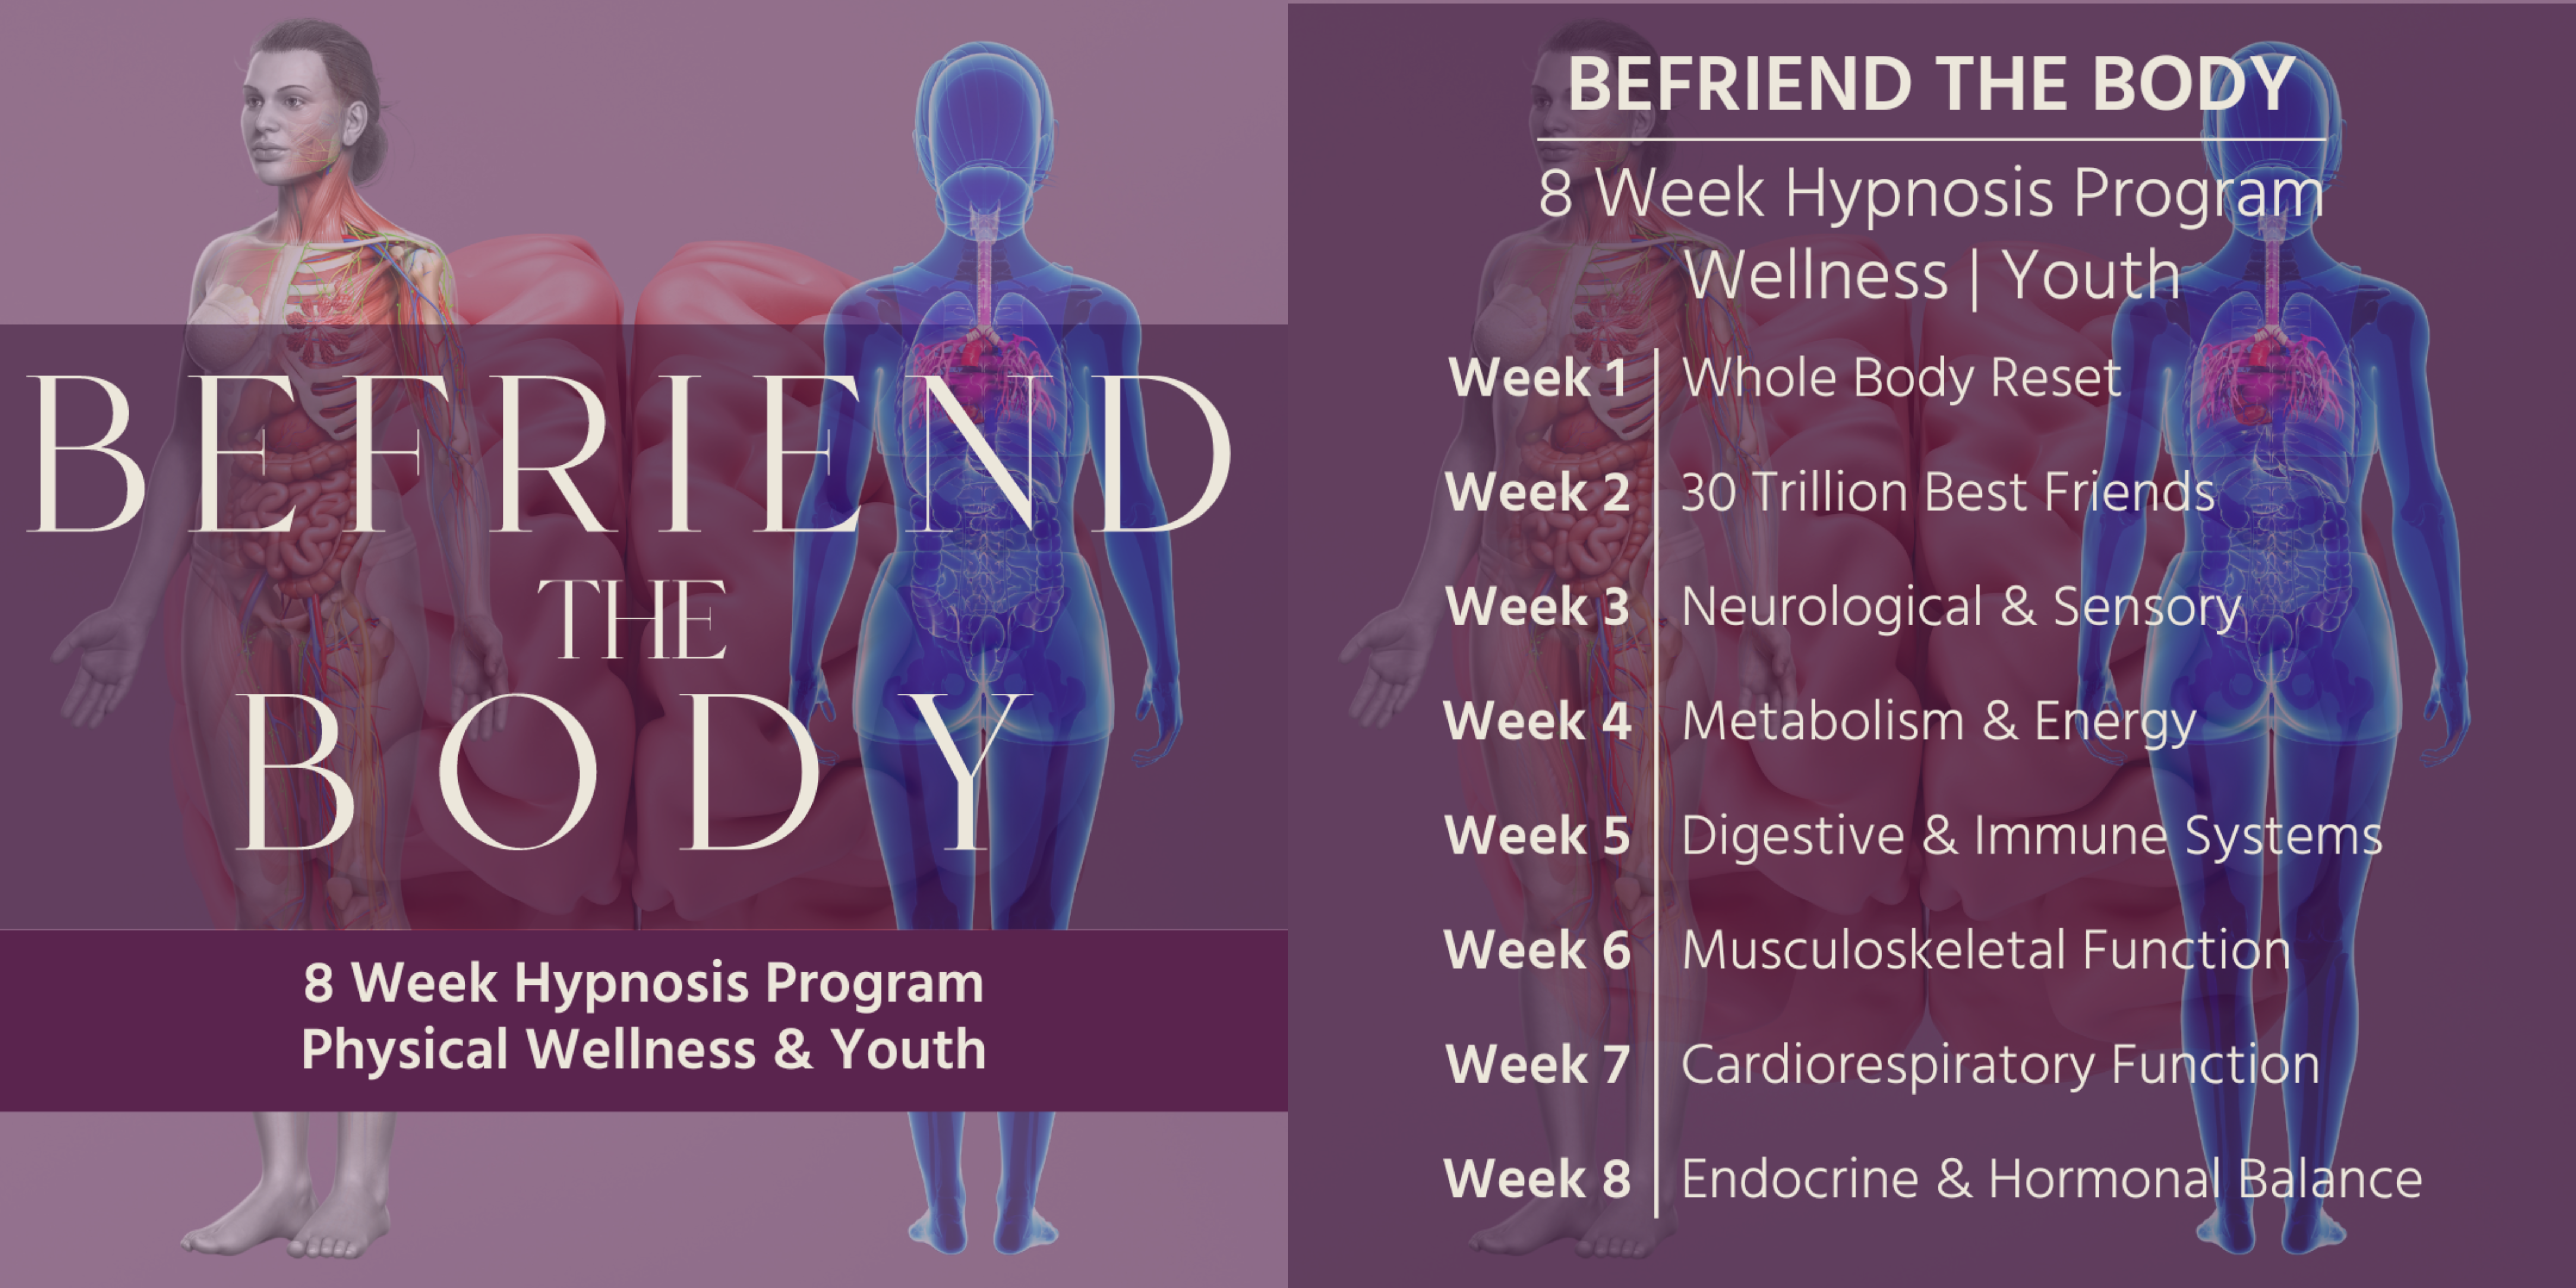 befriend the body 8 week hypnosis program for physical wellness and youth